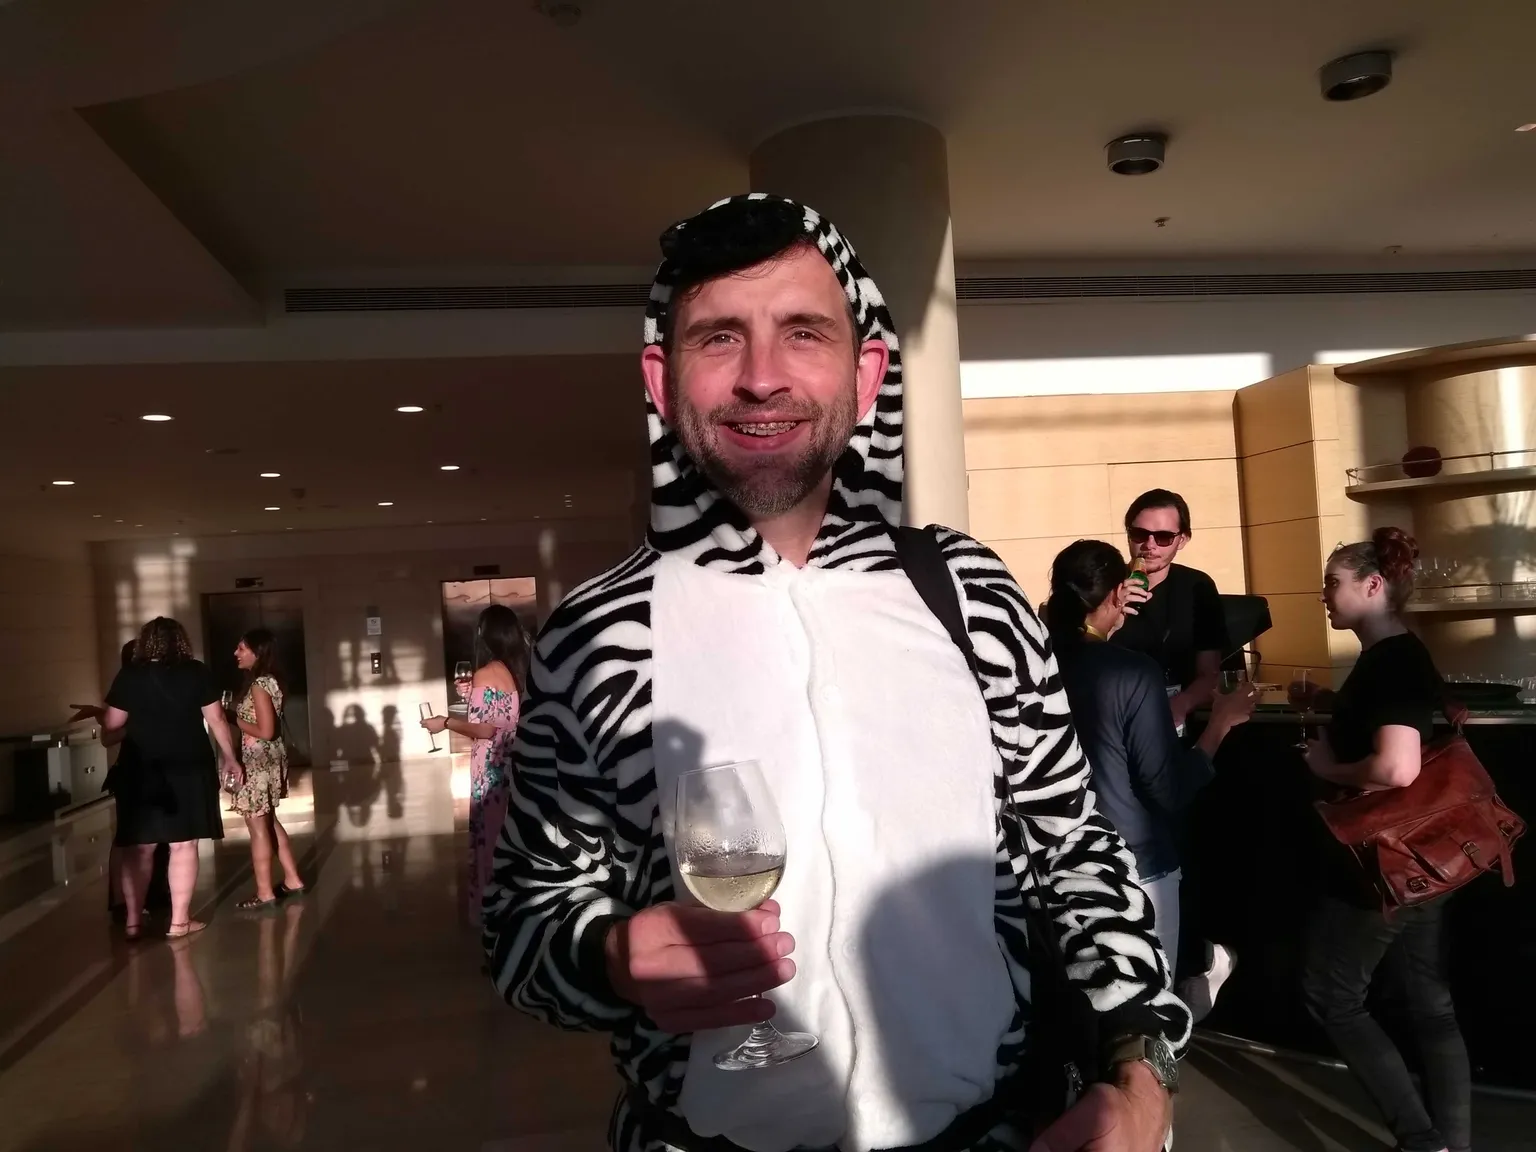 Wilcox wore a Zebra costume for a full day at Zcon1—despite the blistering heat.